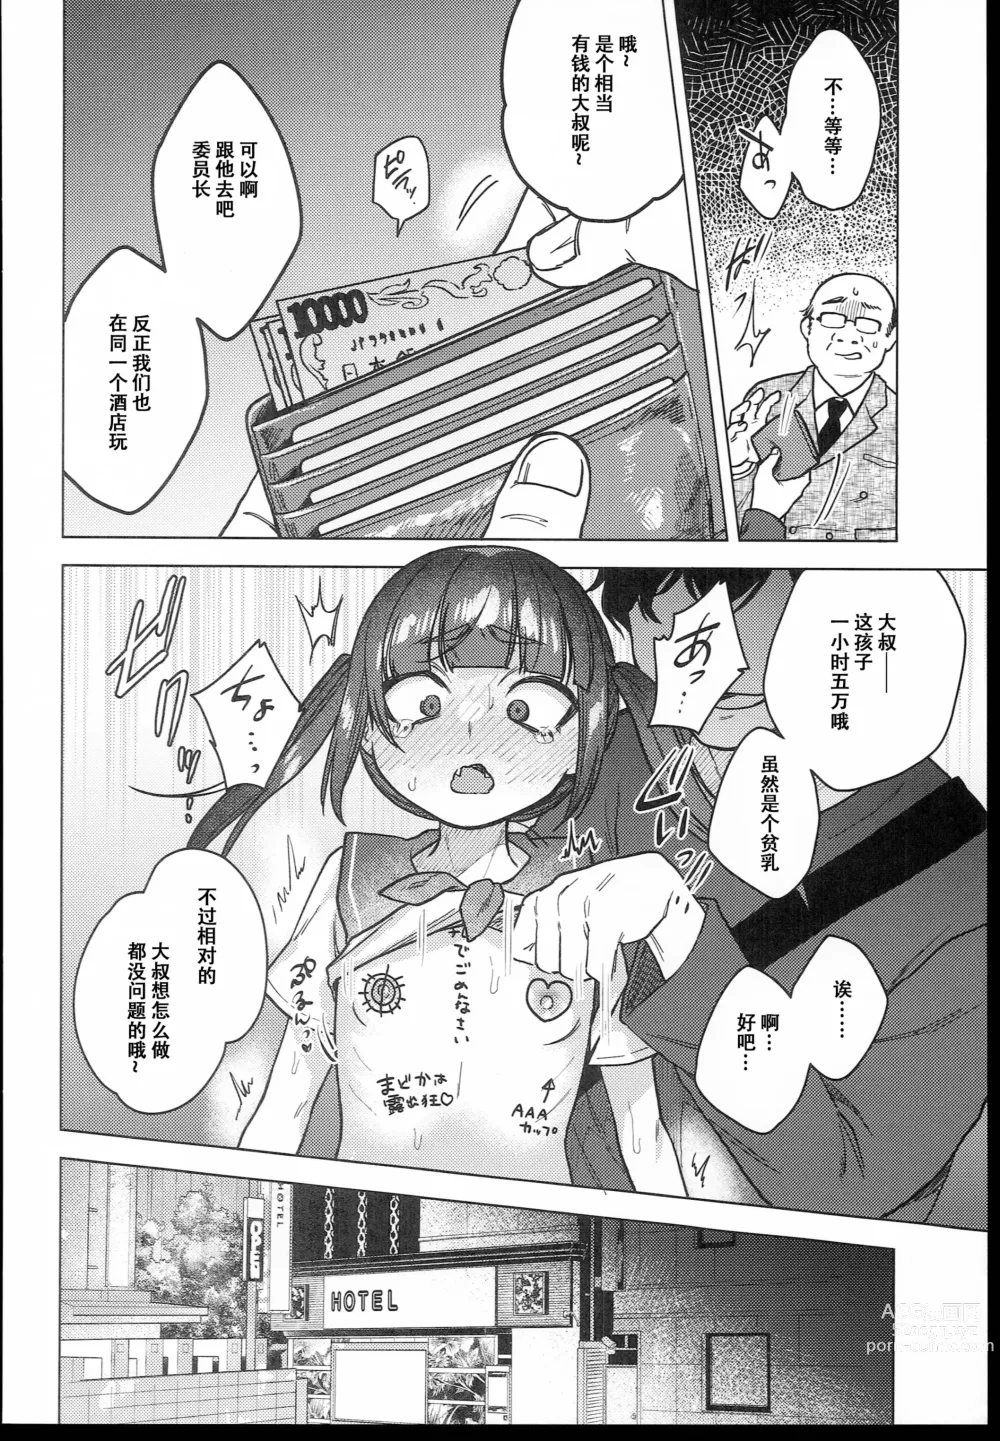 Page 20 of doujinshi 委員長は今日からみんなのオモチャ～終わった学校生活編～